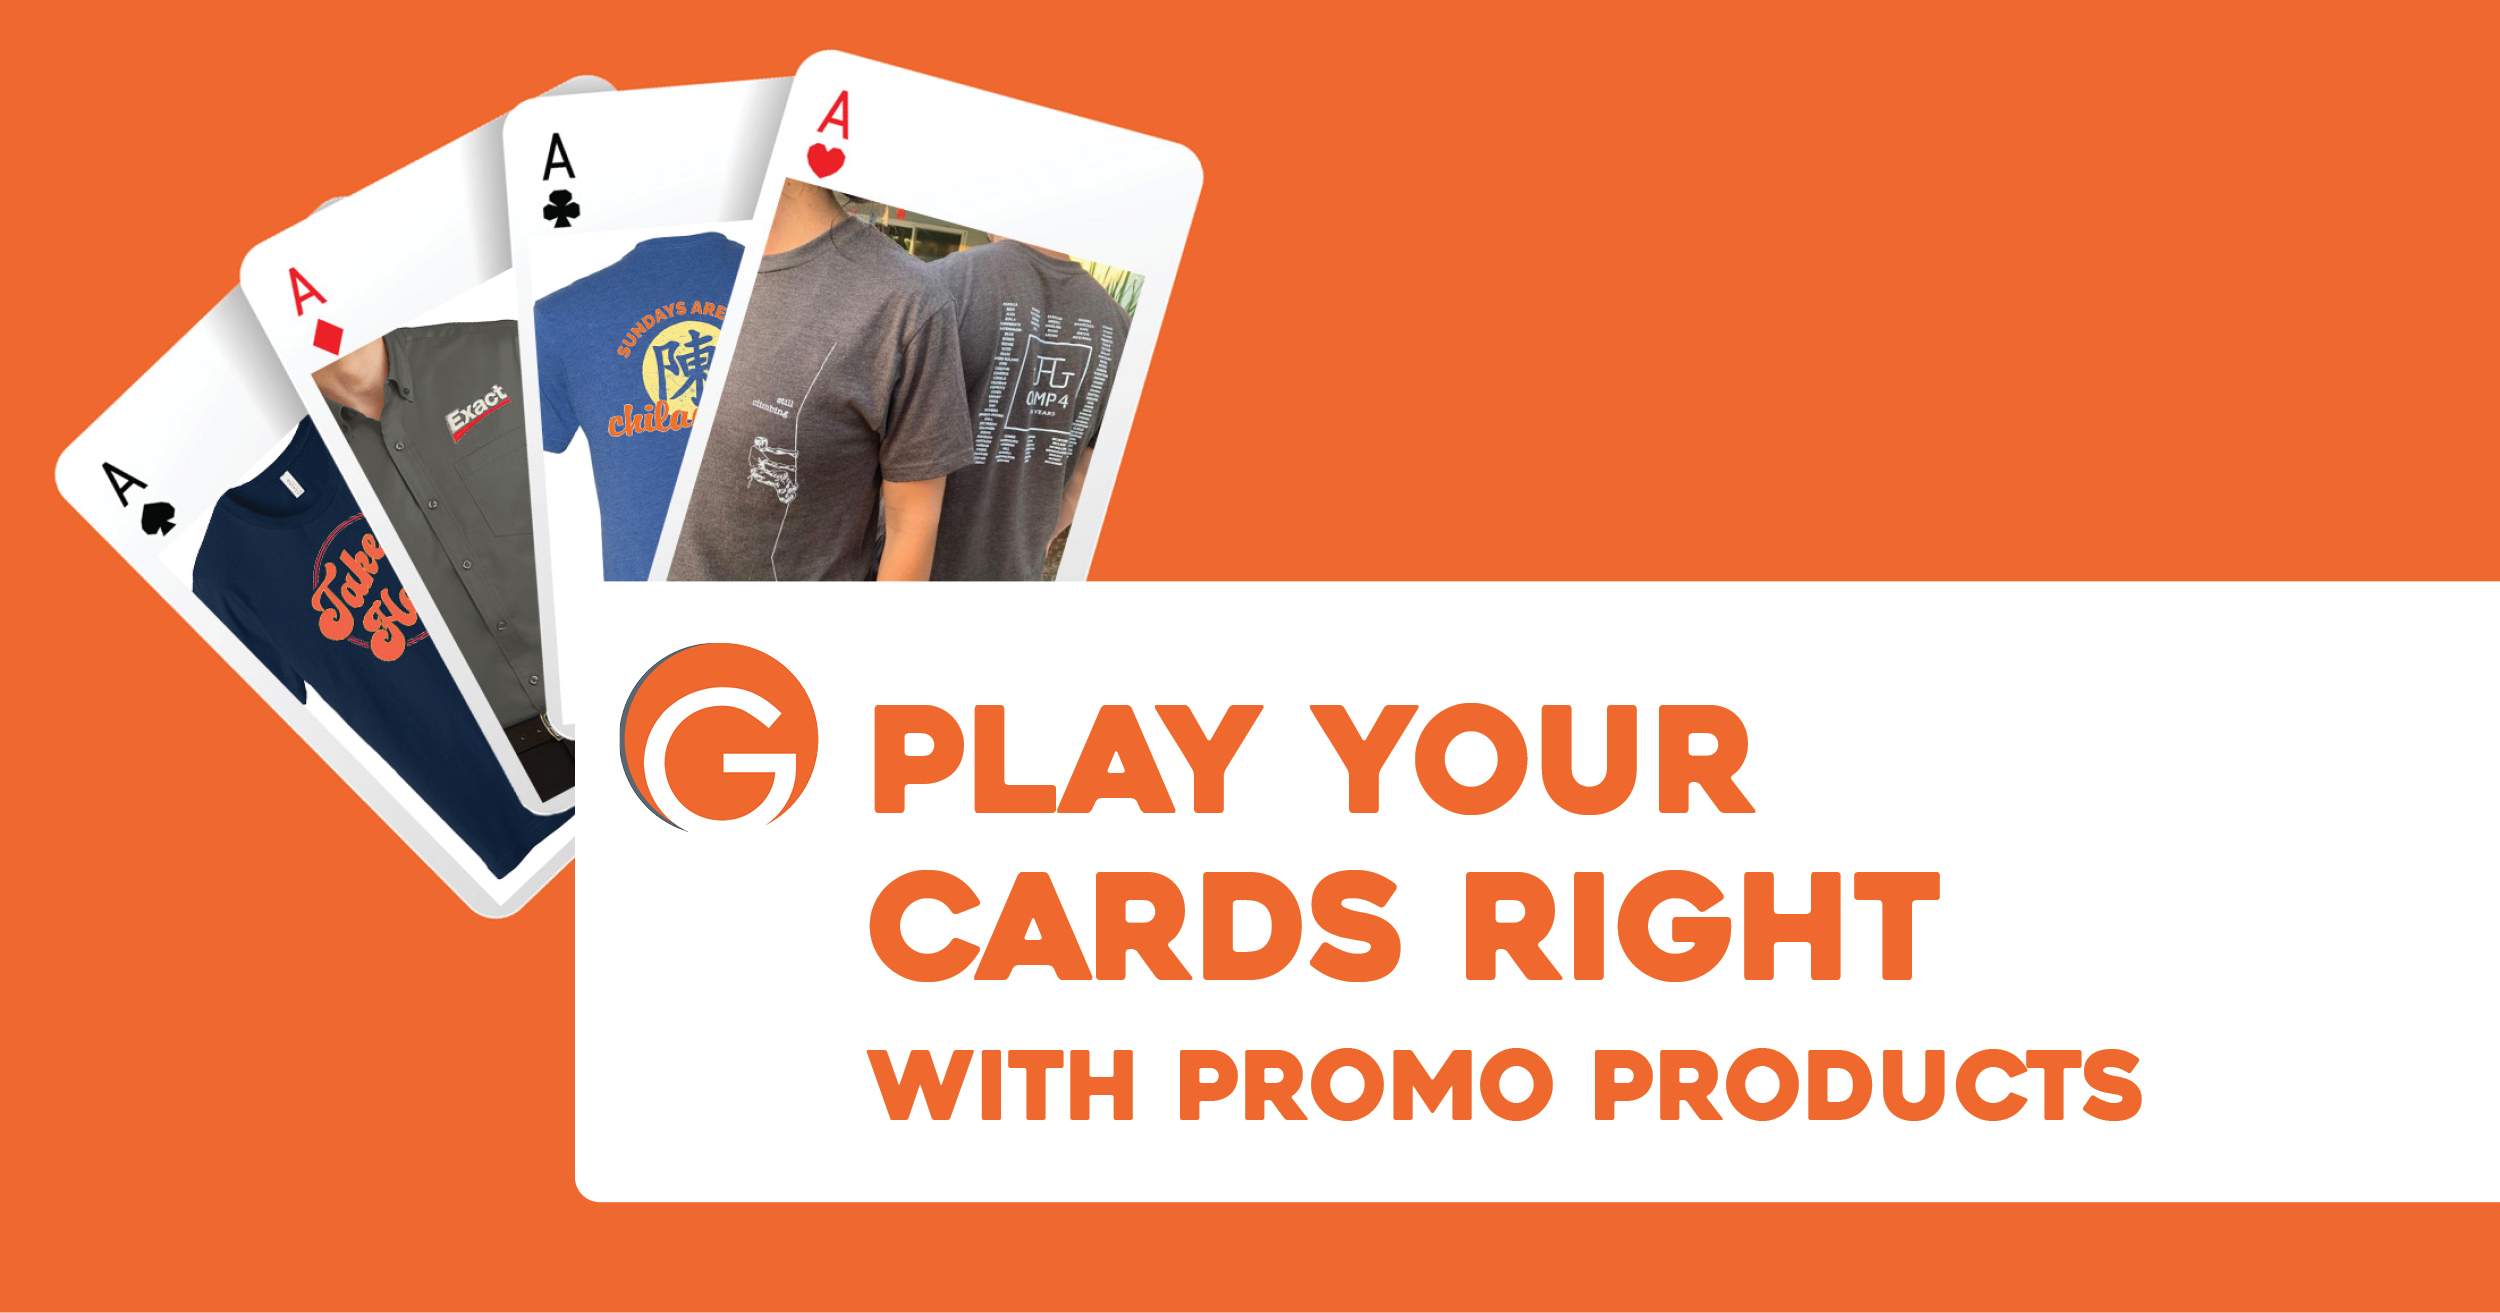 Play your cards right!